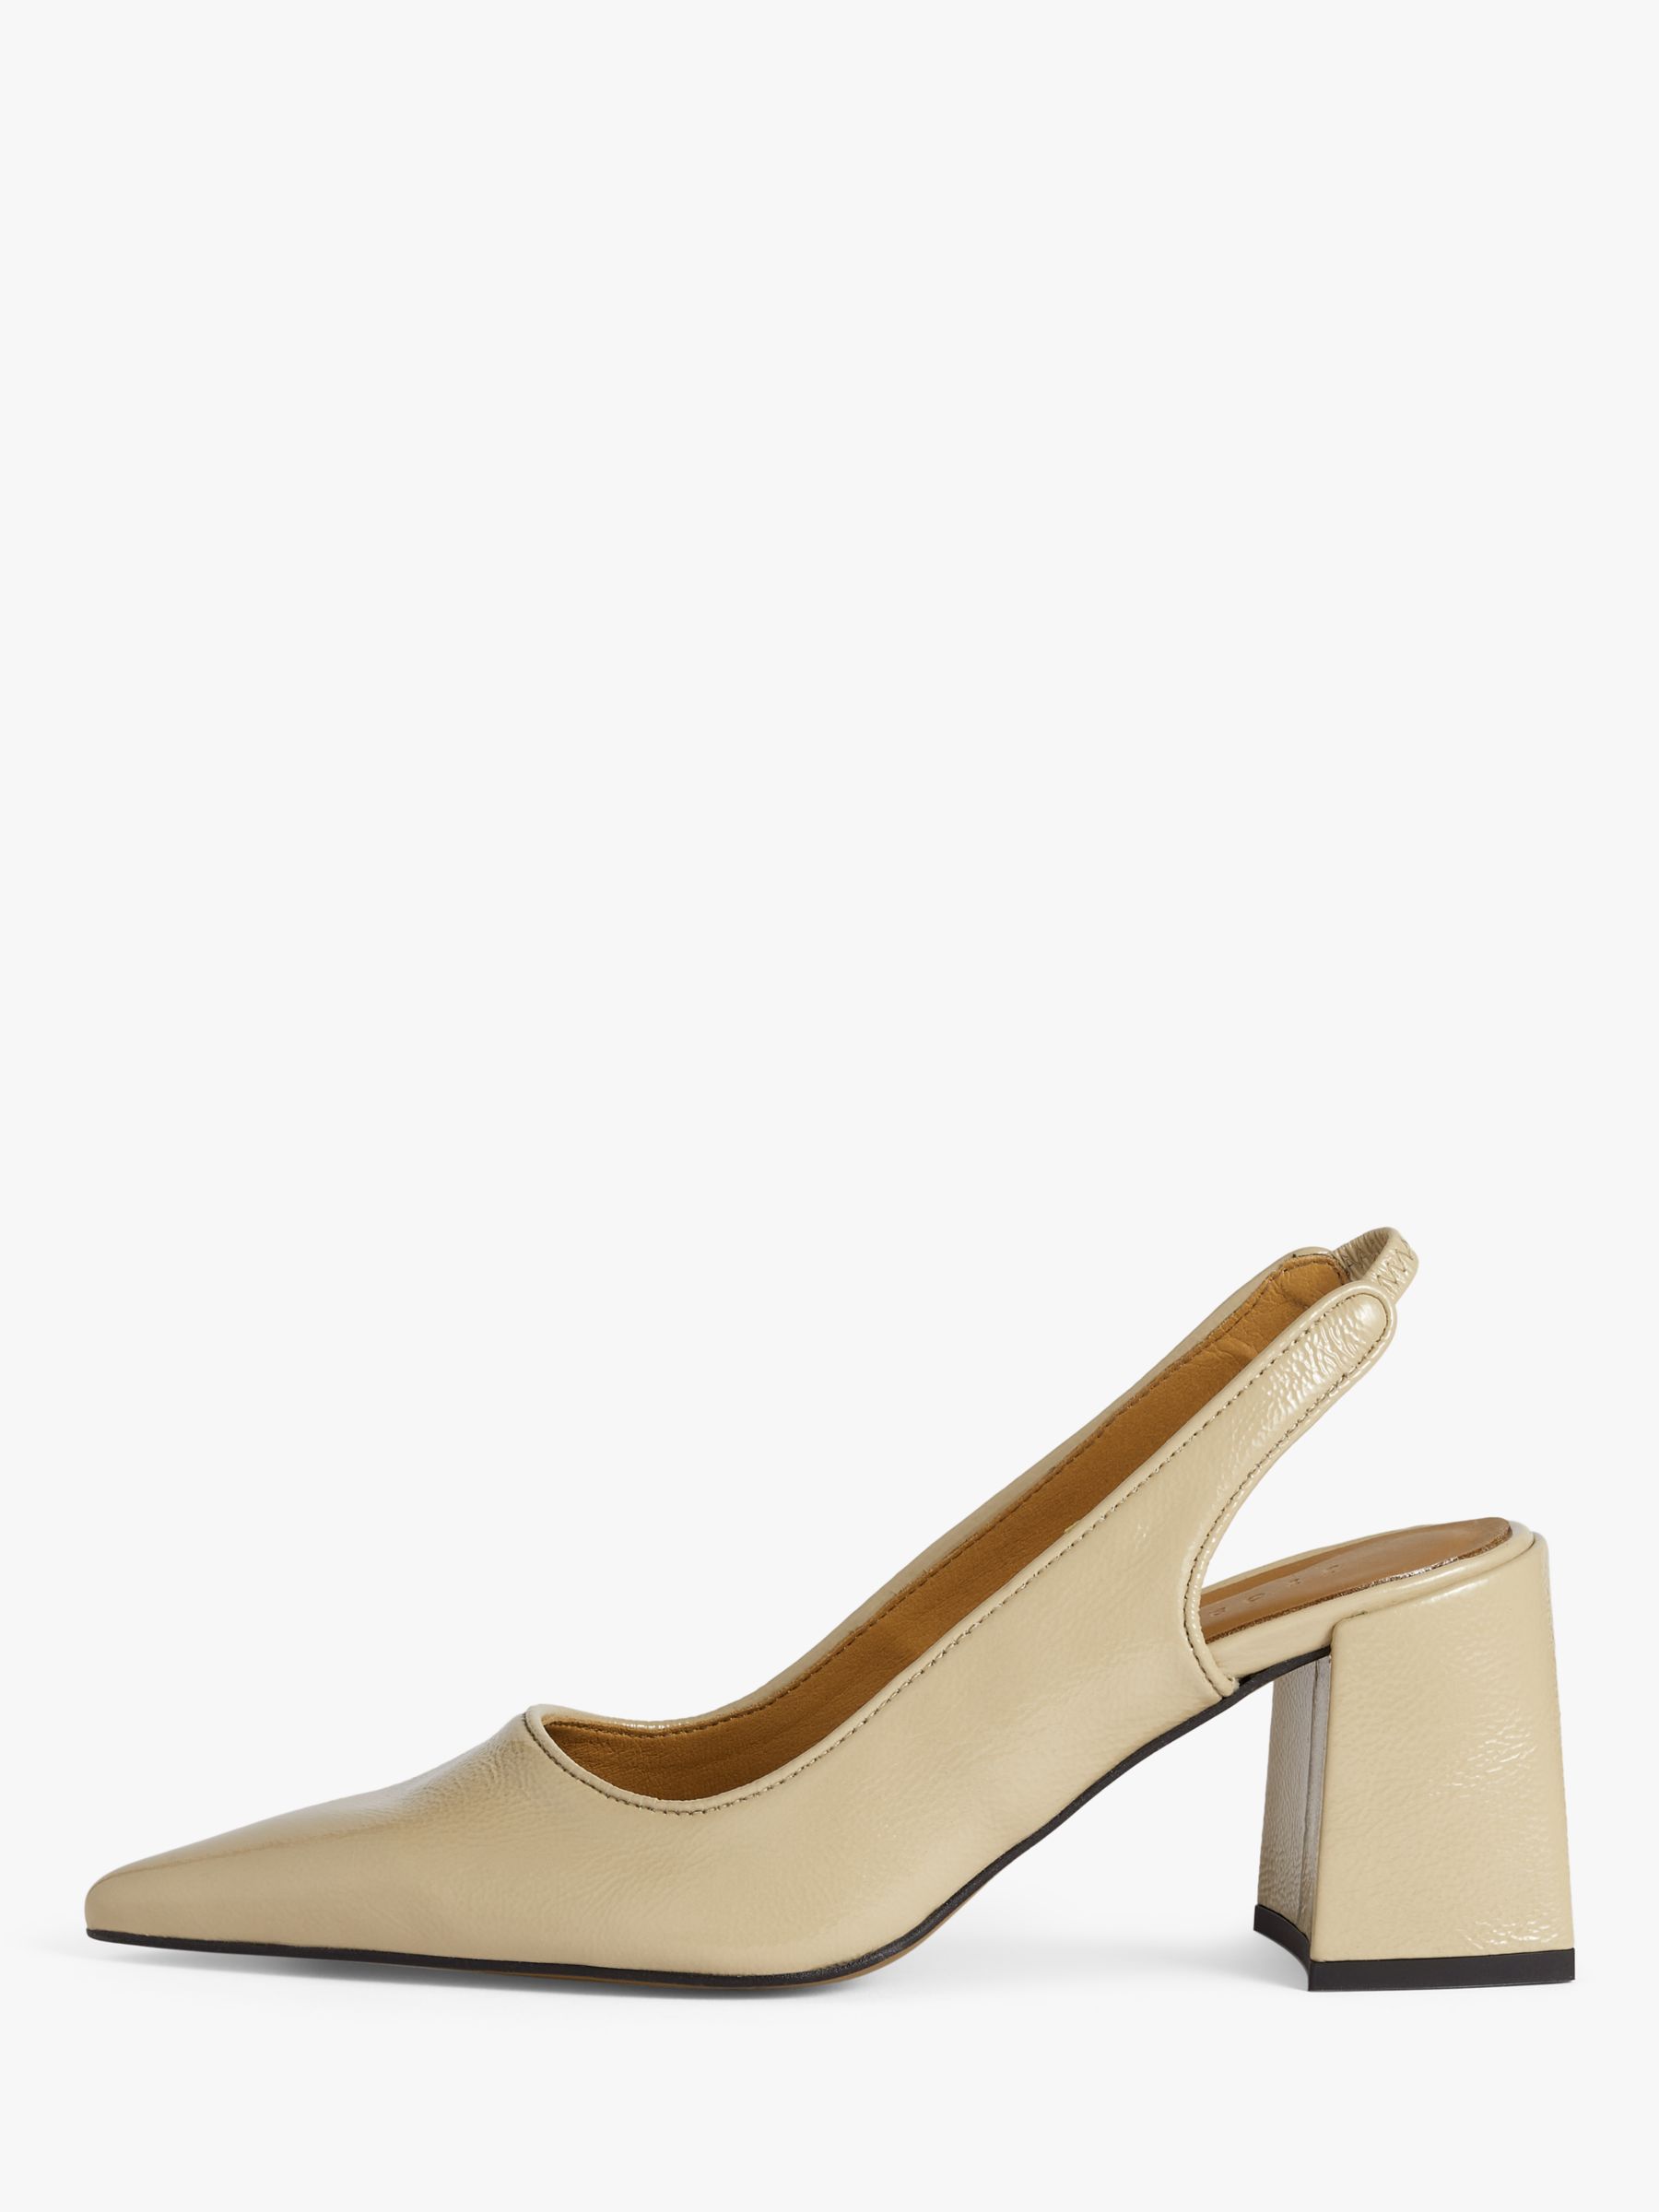 Jigsaw Alford Leather Sling Back Court Shoes, Nude at John Lewis & Partners